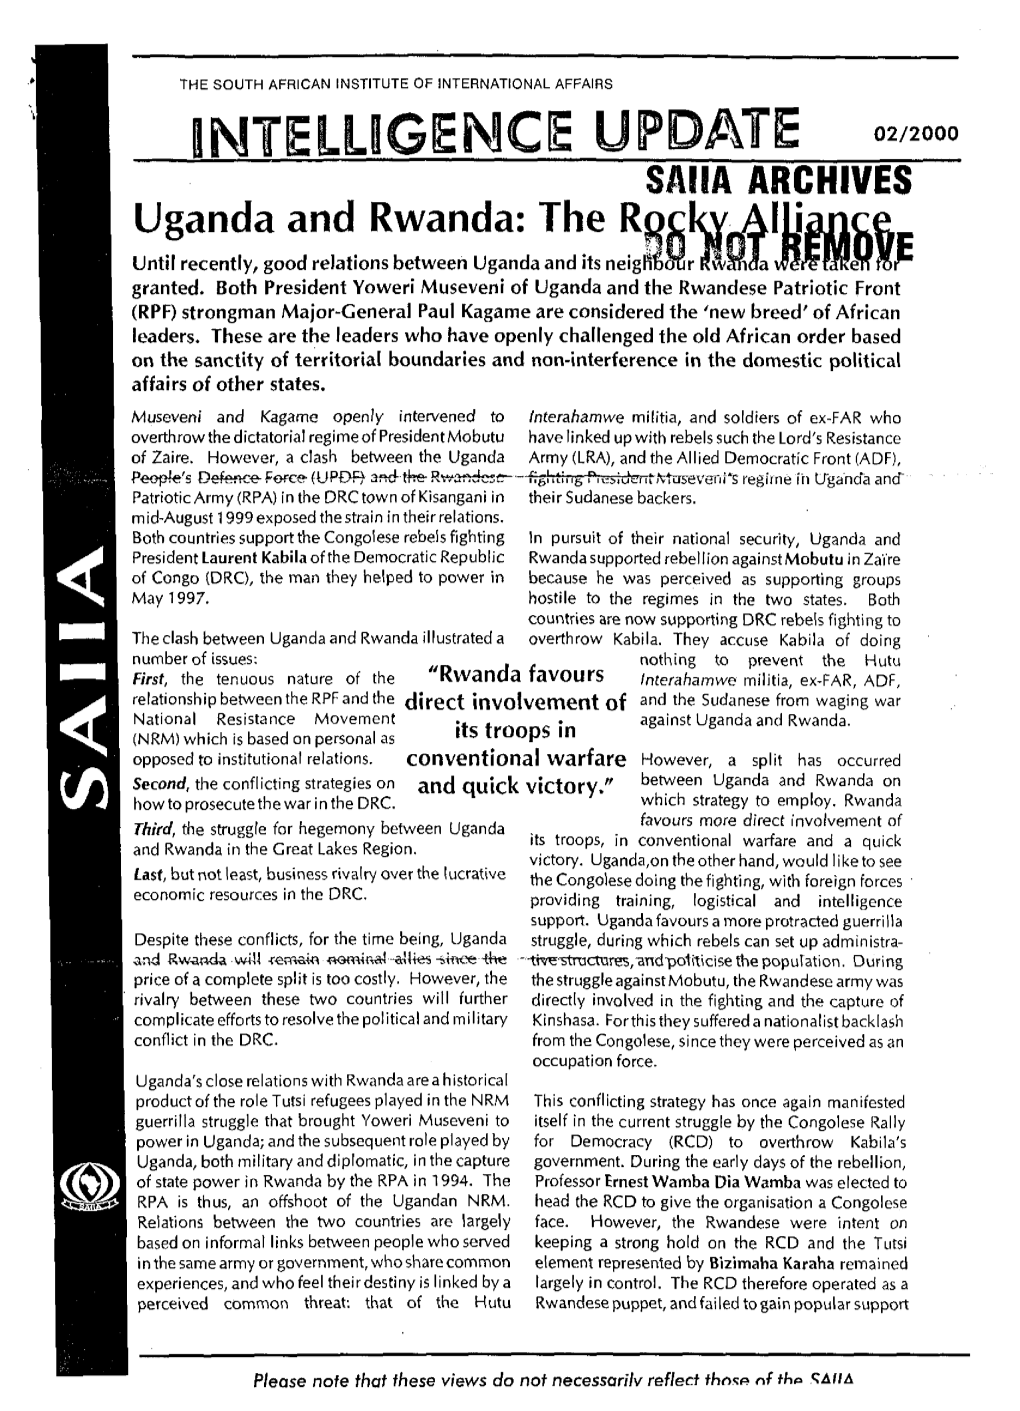 SANA ARCHIVES Uganda and Rwanda: the R Until Recently, Good Relations Between Uganda and Its Neigh Granted